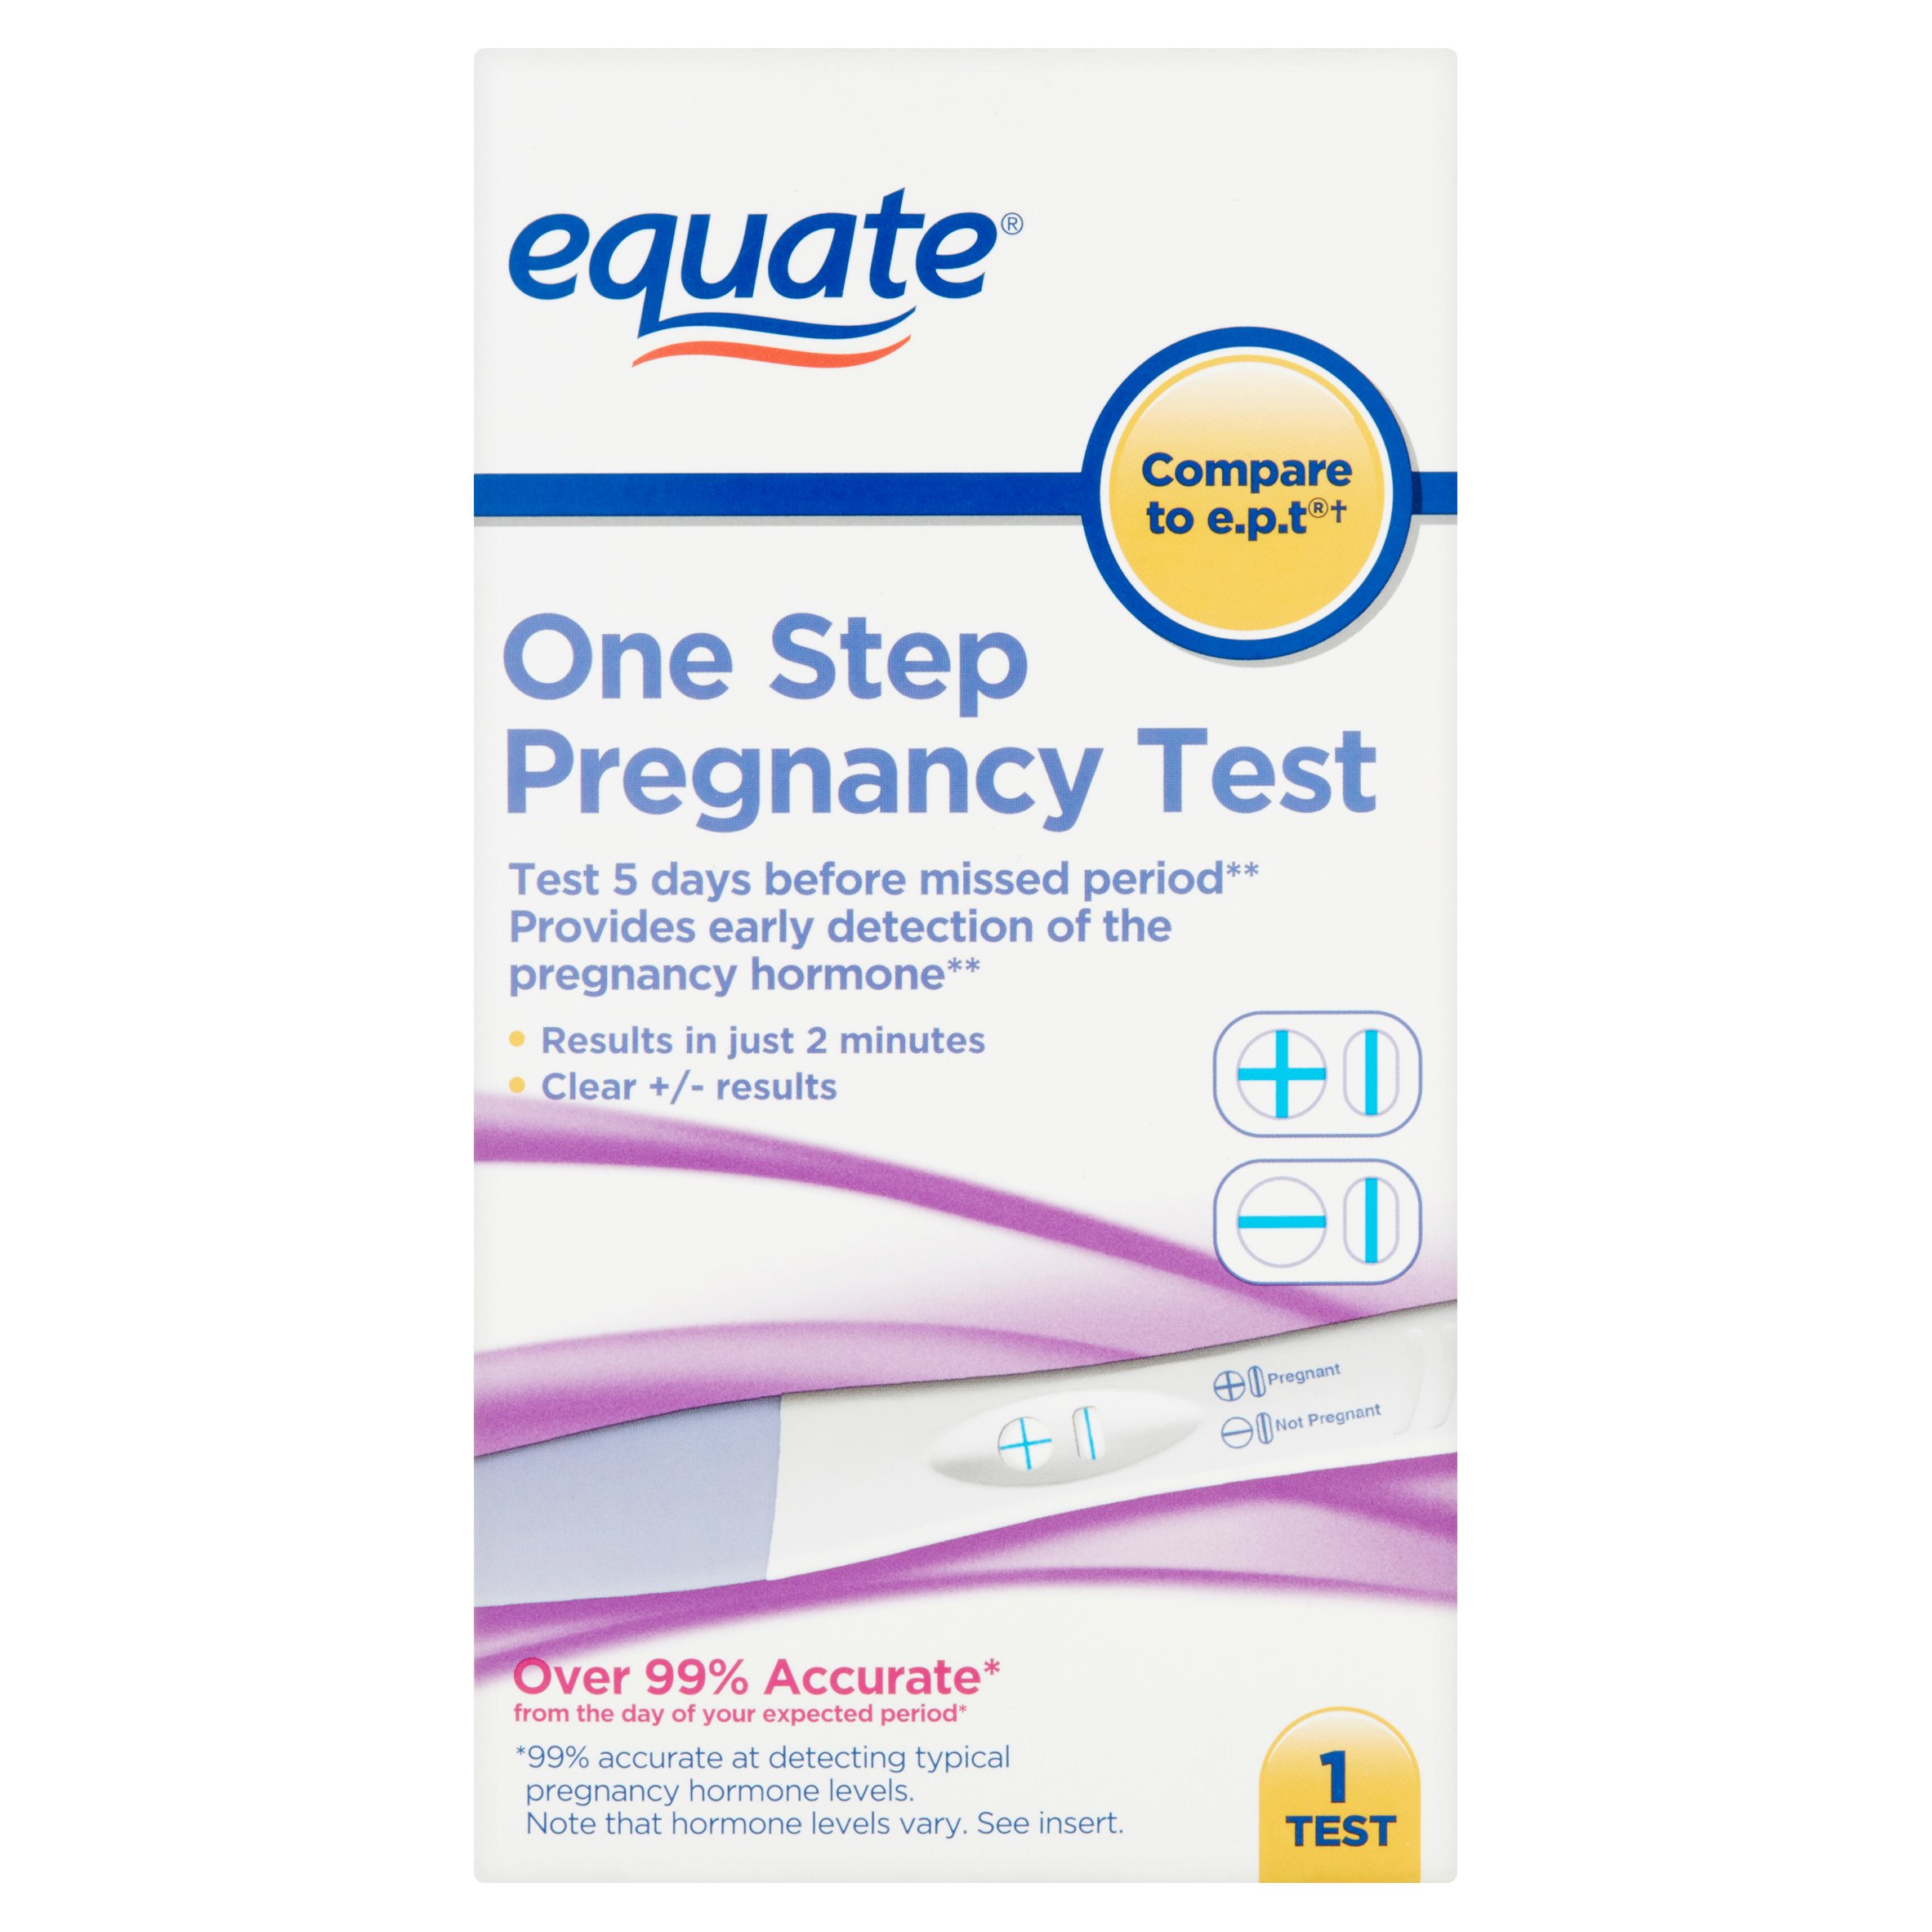 Equate One Step Pregnancy Test - image 1 of 5